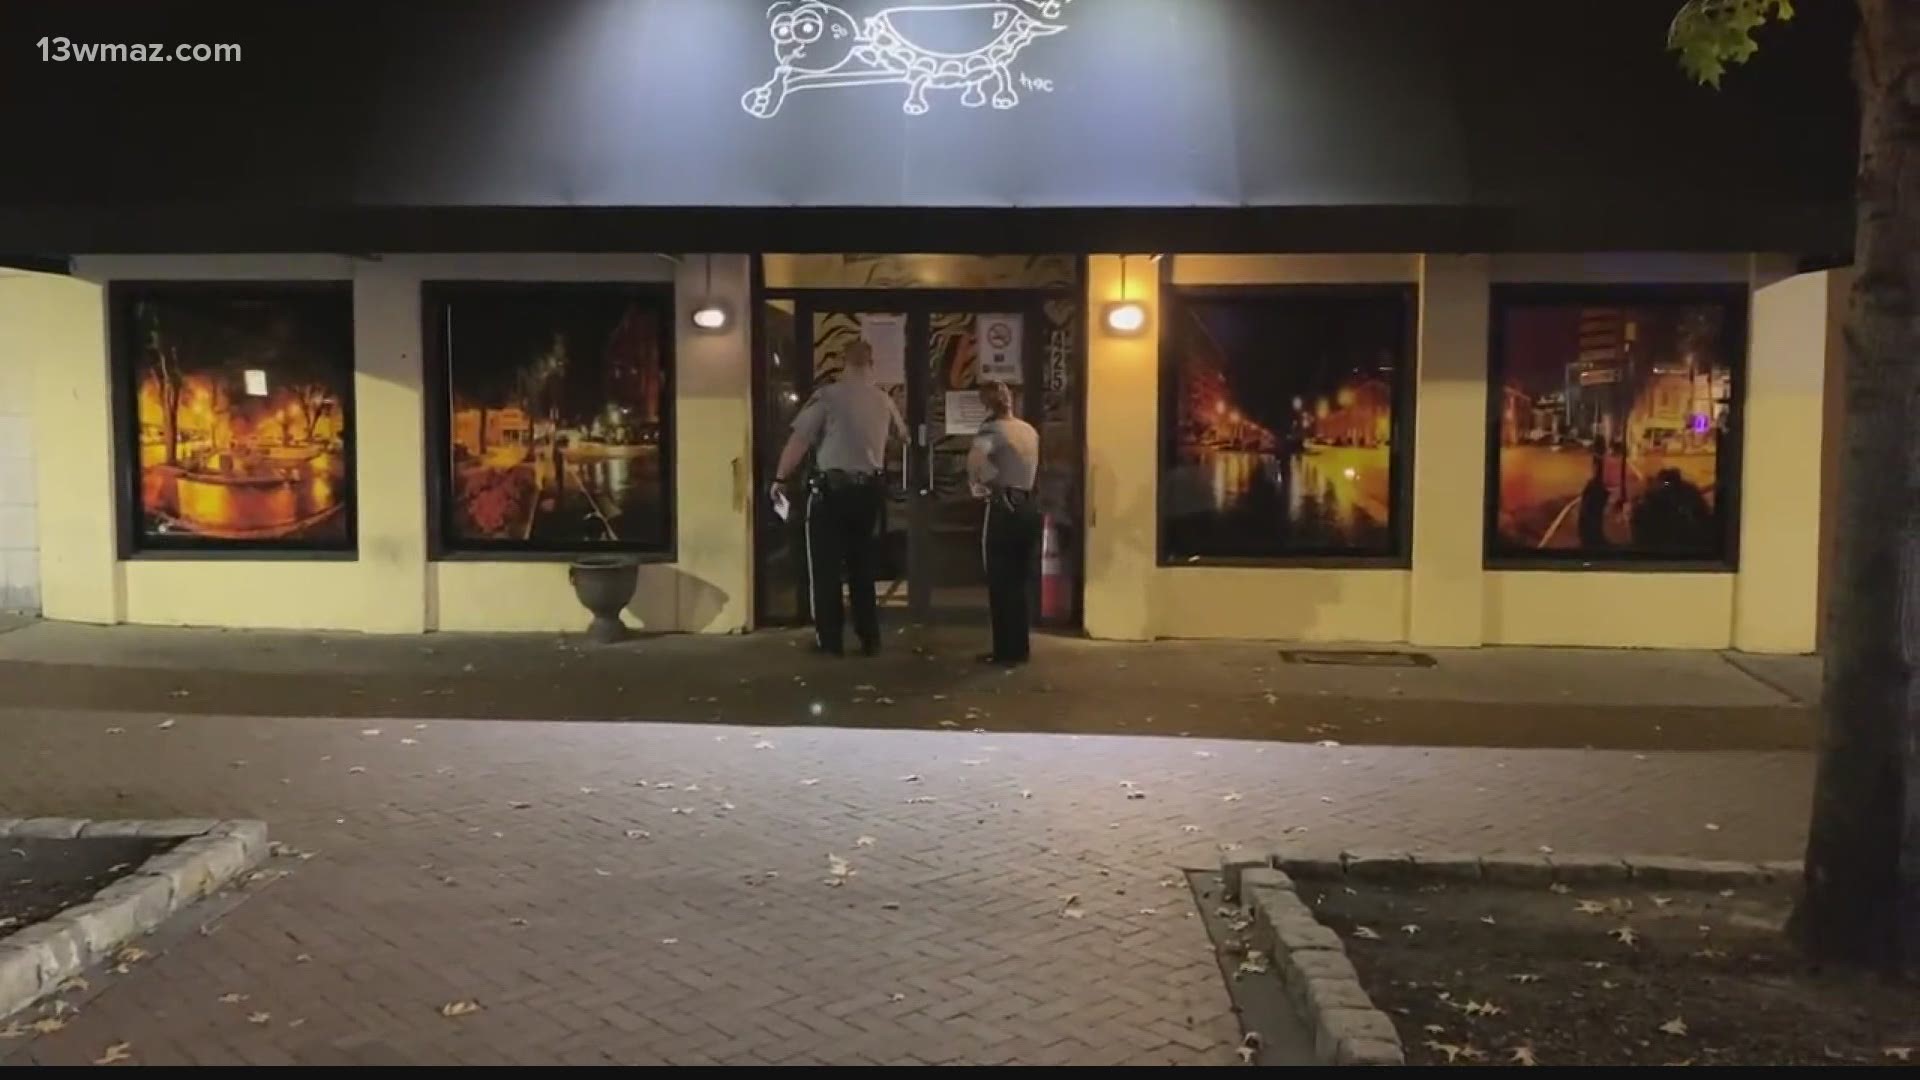 Bibb County Sheriff's Office temporarily suspended the alcohol license for The Thirsty Turtle, less than 24 hours after an attack happened outside the bar Friday